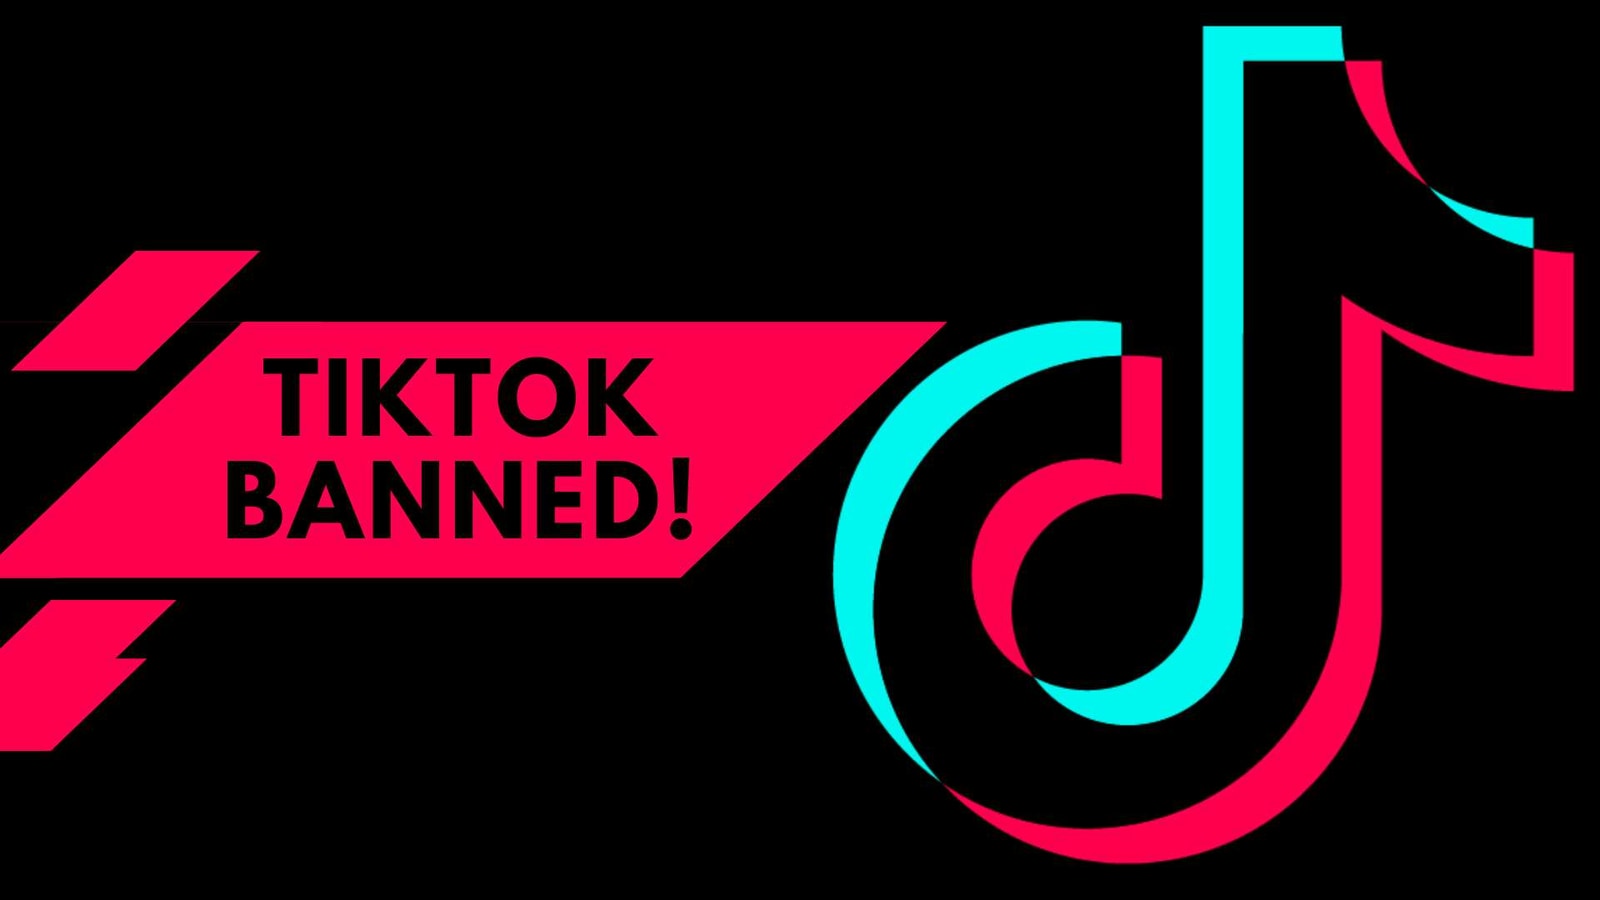 TikTok stops working for users in India after govt bans the app | Tech News